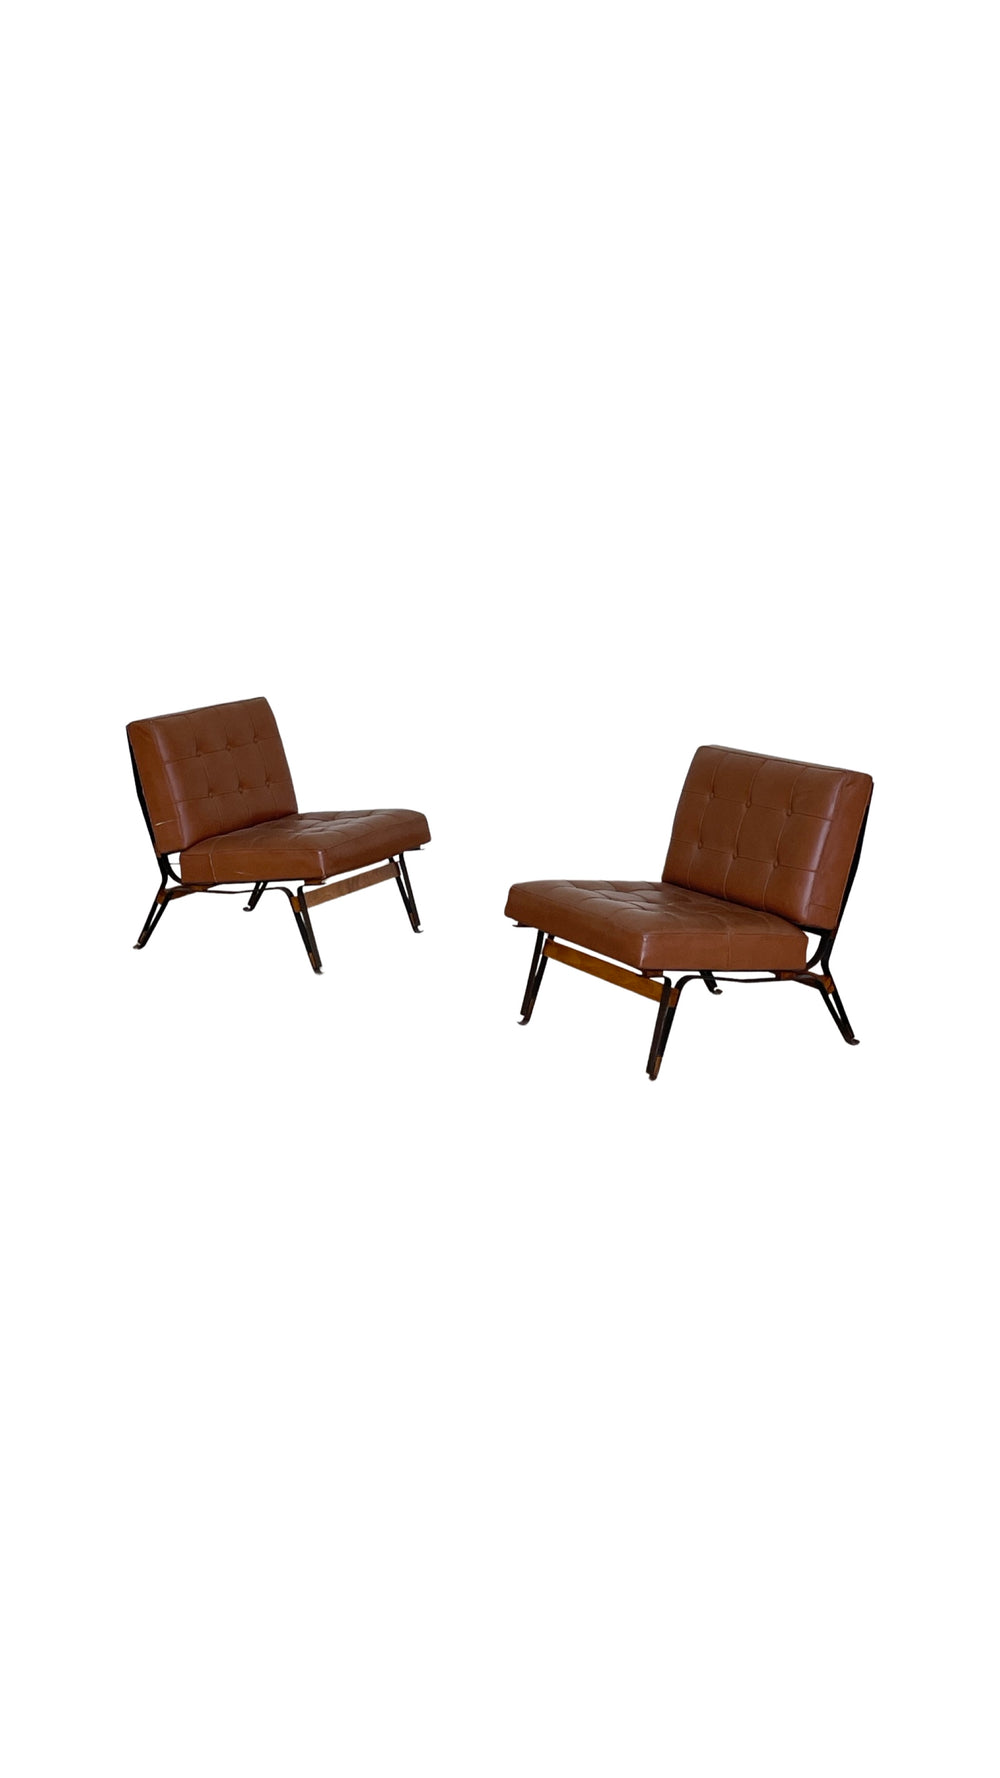 Ico Parisi model 856 rare pair of matched lounge chairs for Cassina, Italy, 1950s